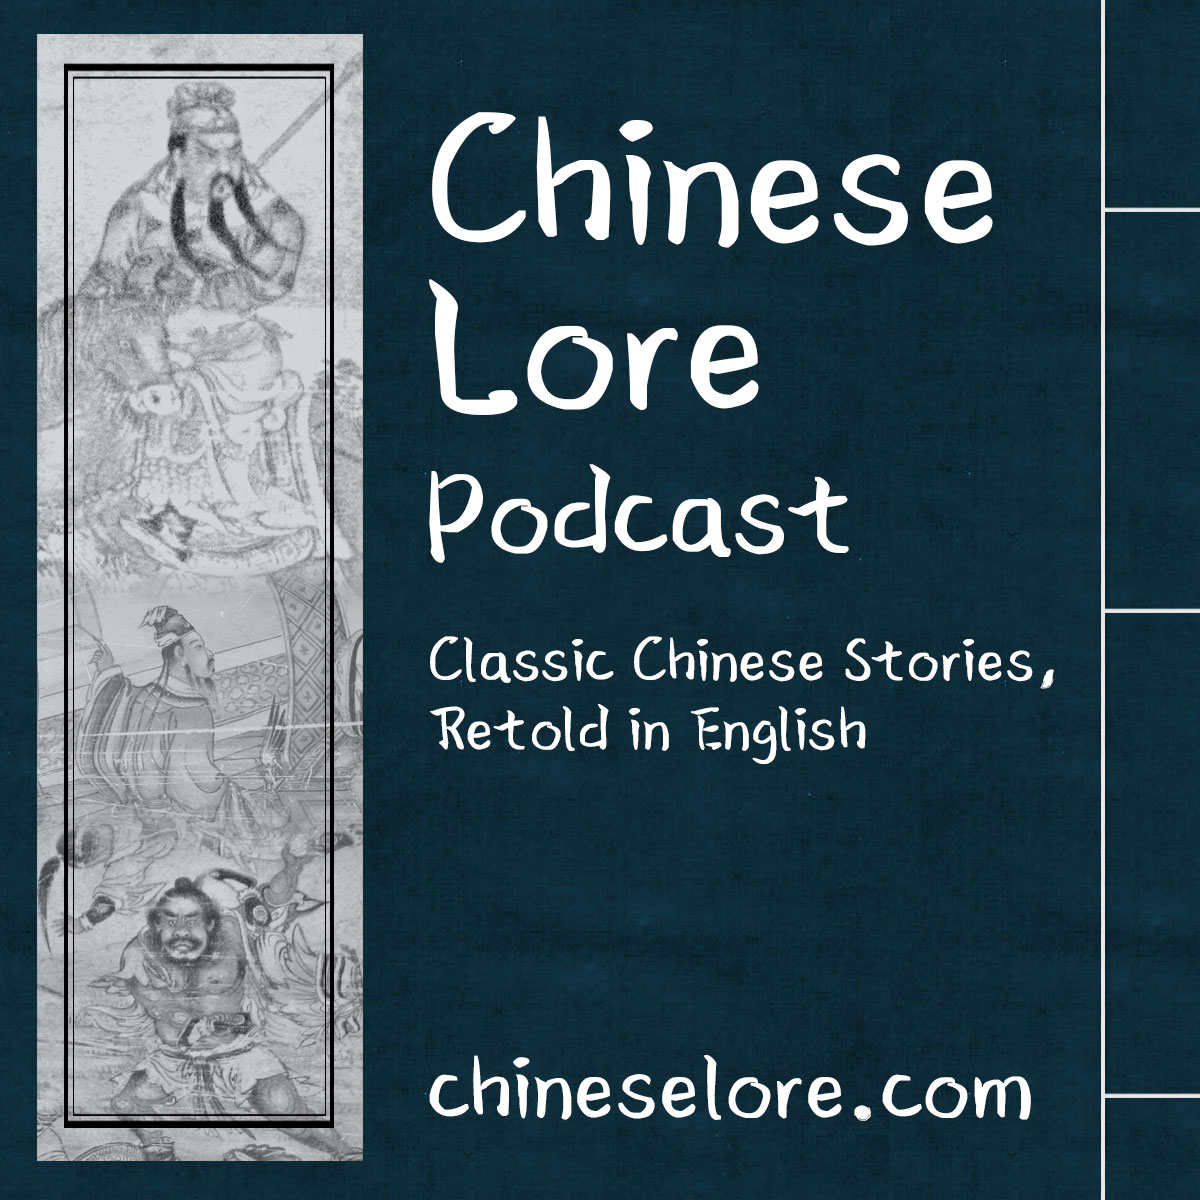 Chinese Lore Podcast